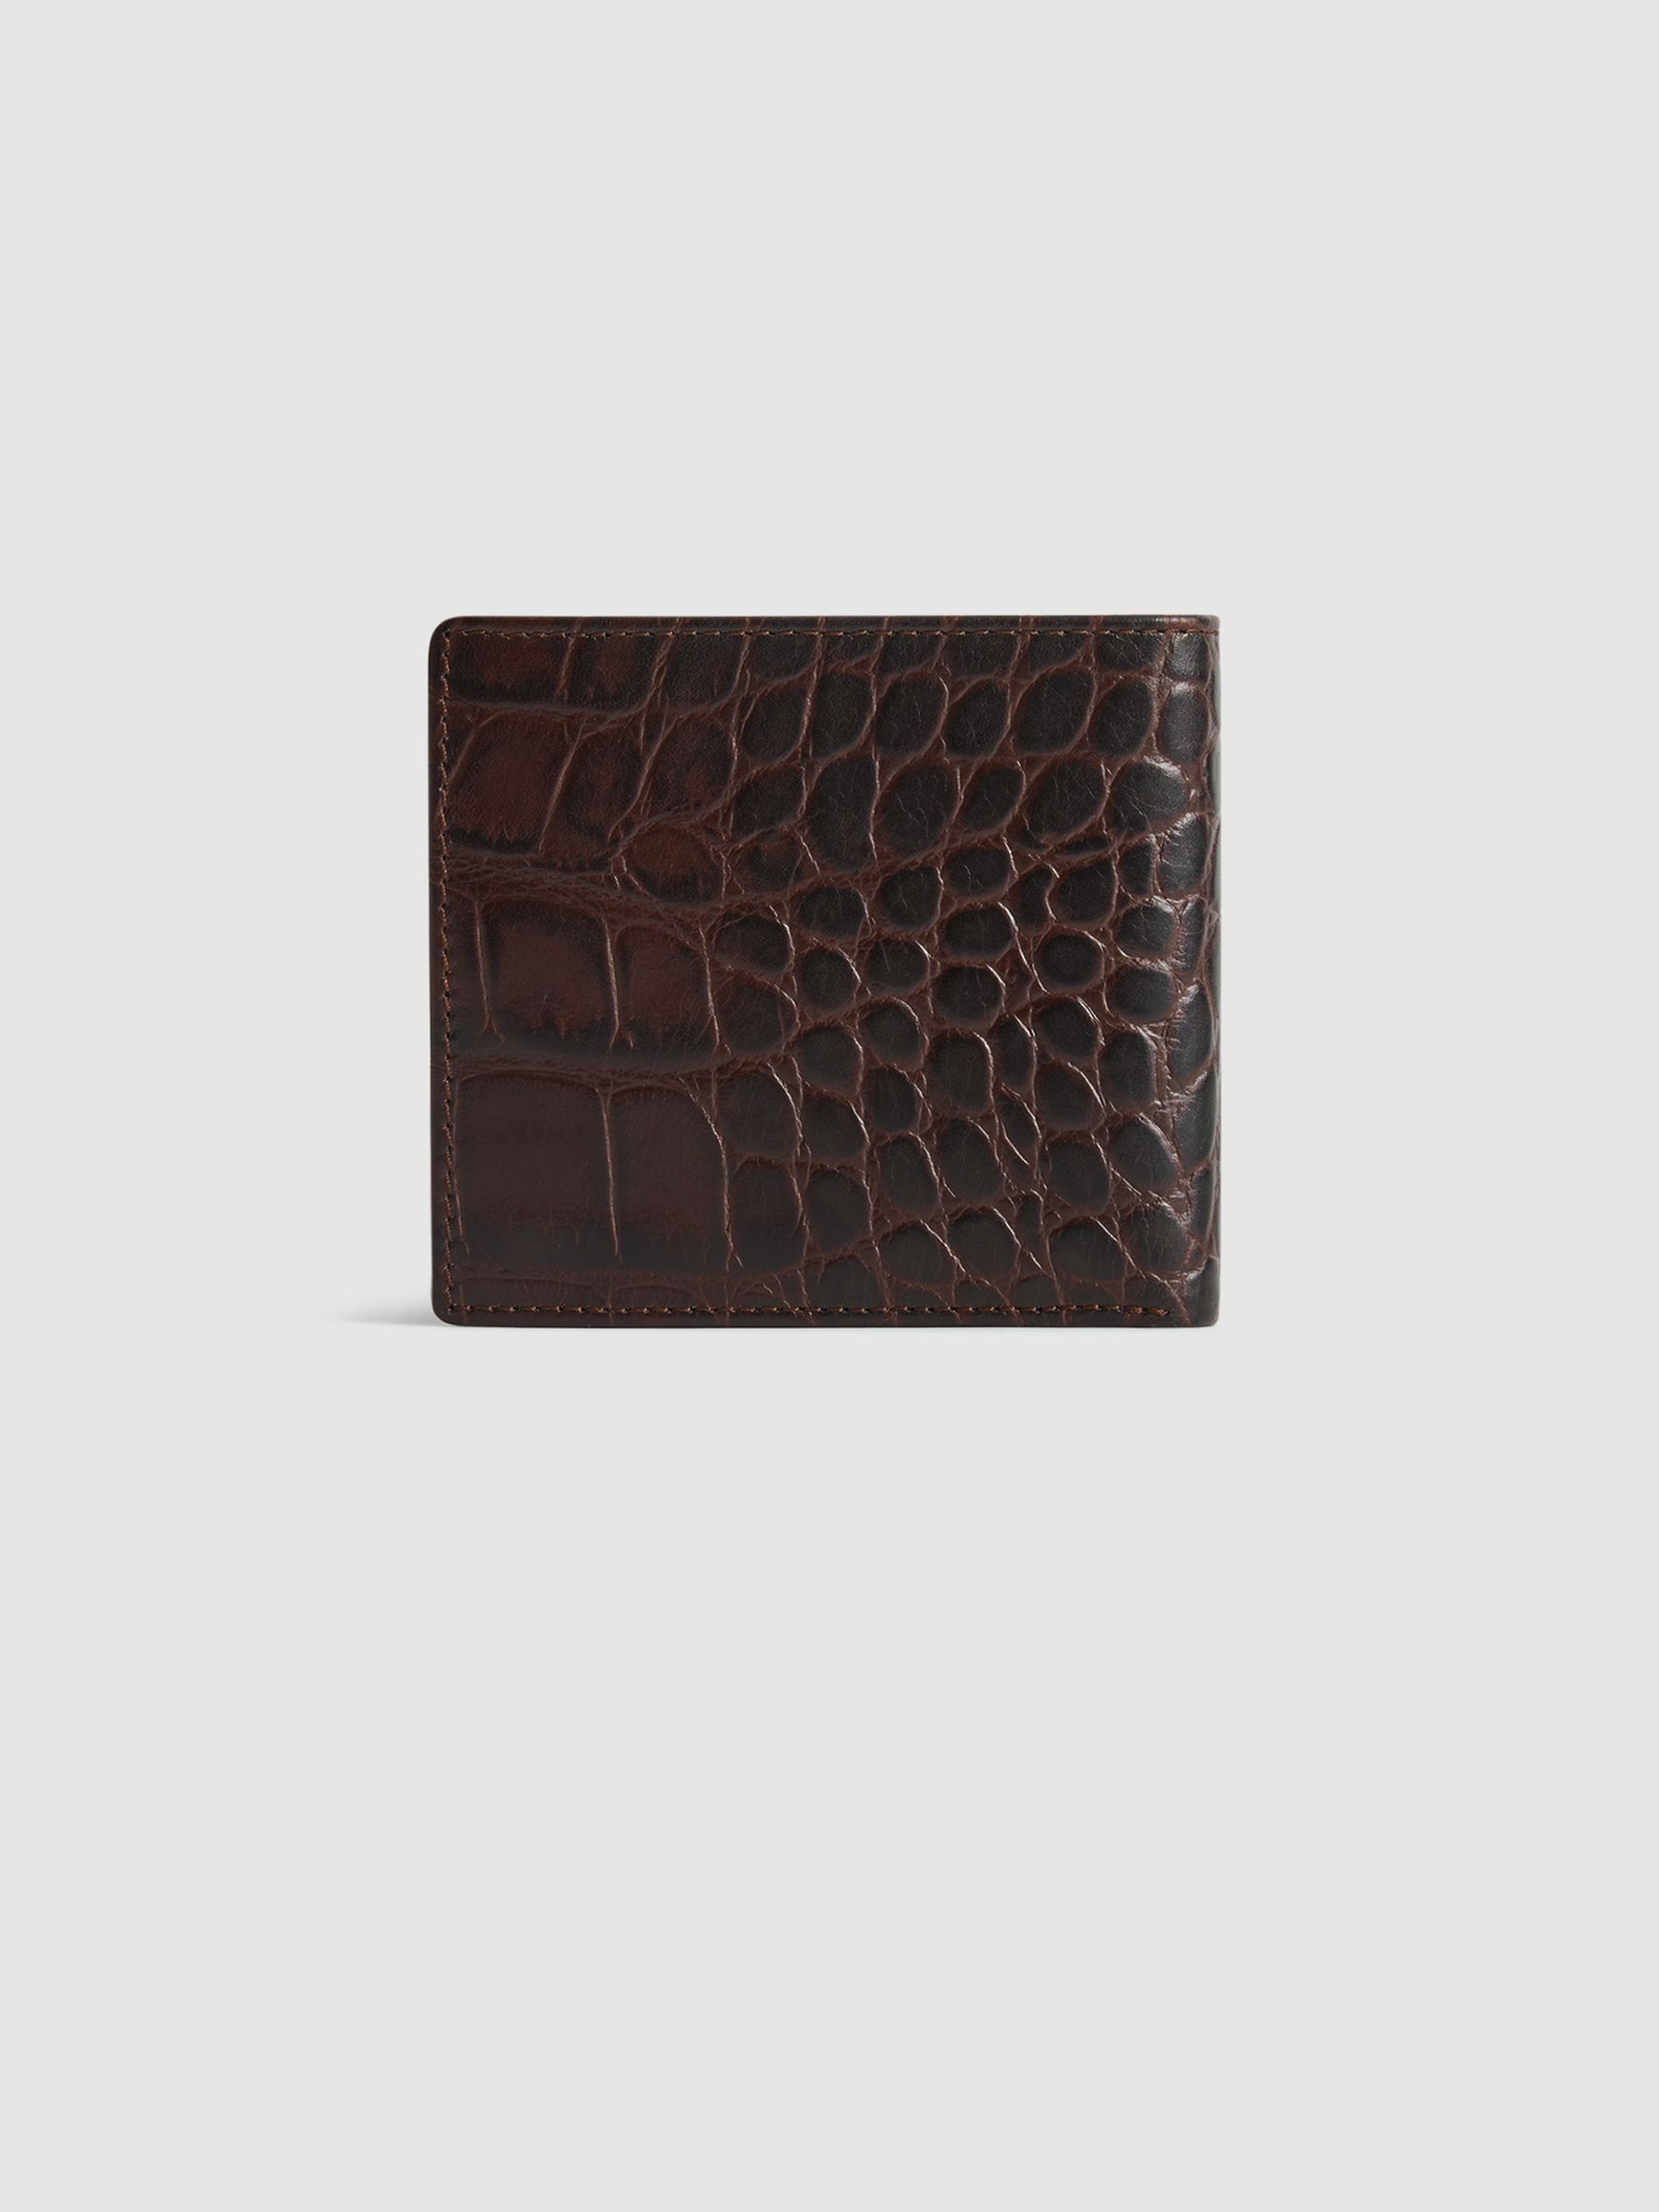 Reiss Cabot Leather Wallet - REISS